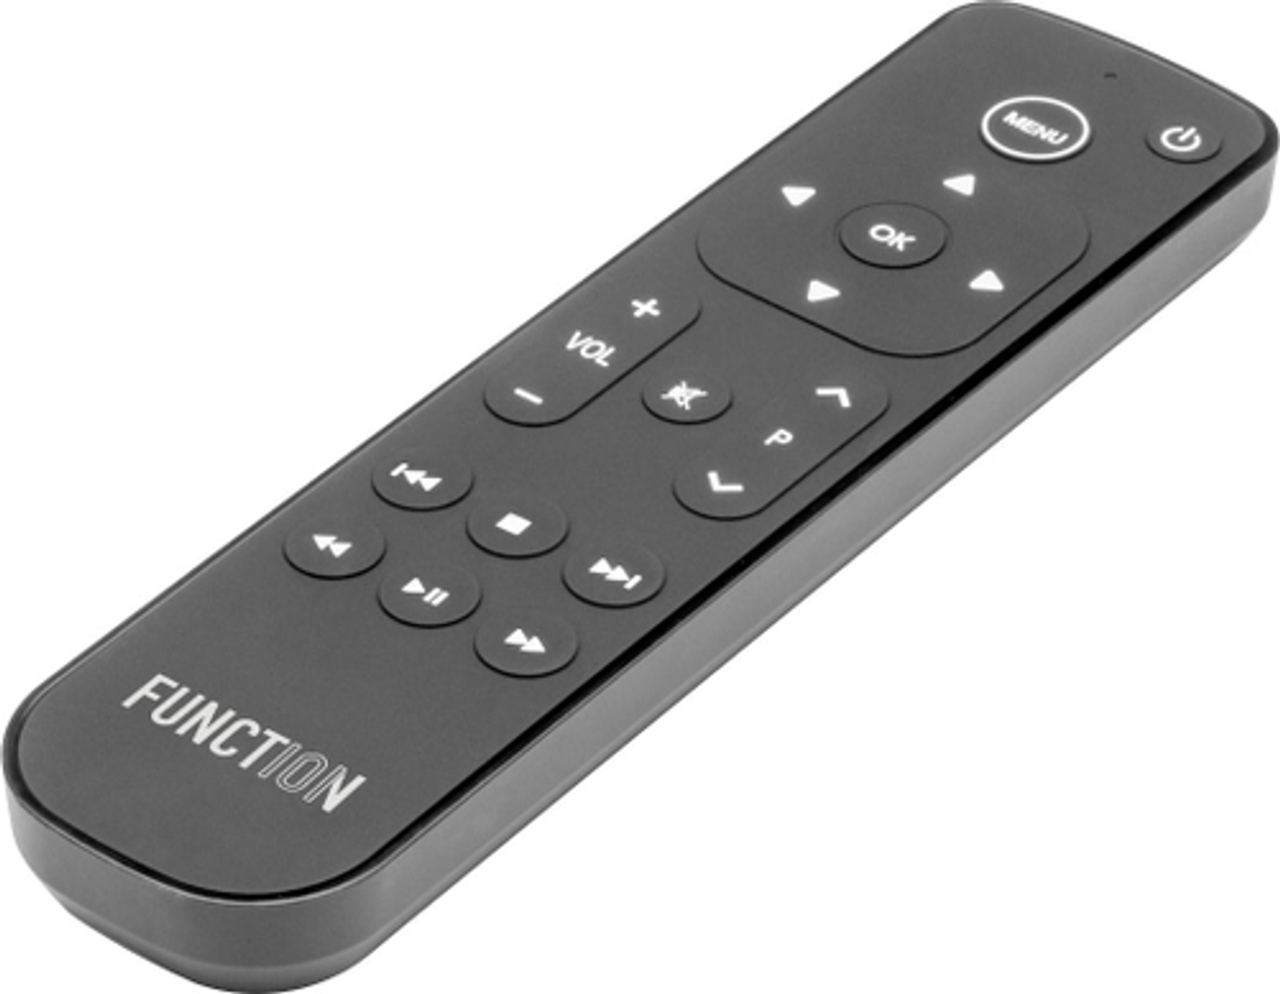 Function 101 - Function101 Button Remote for Apple TV / Apple TV4K - Black